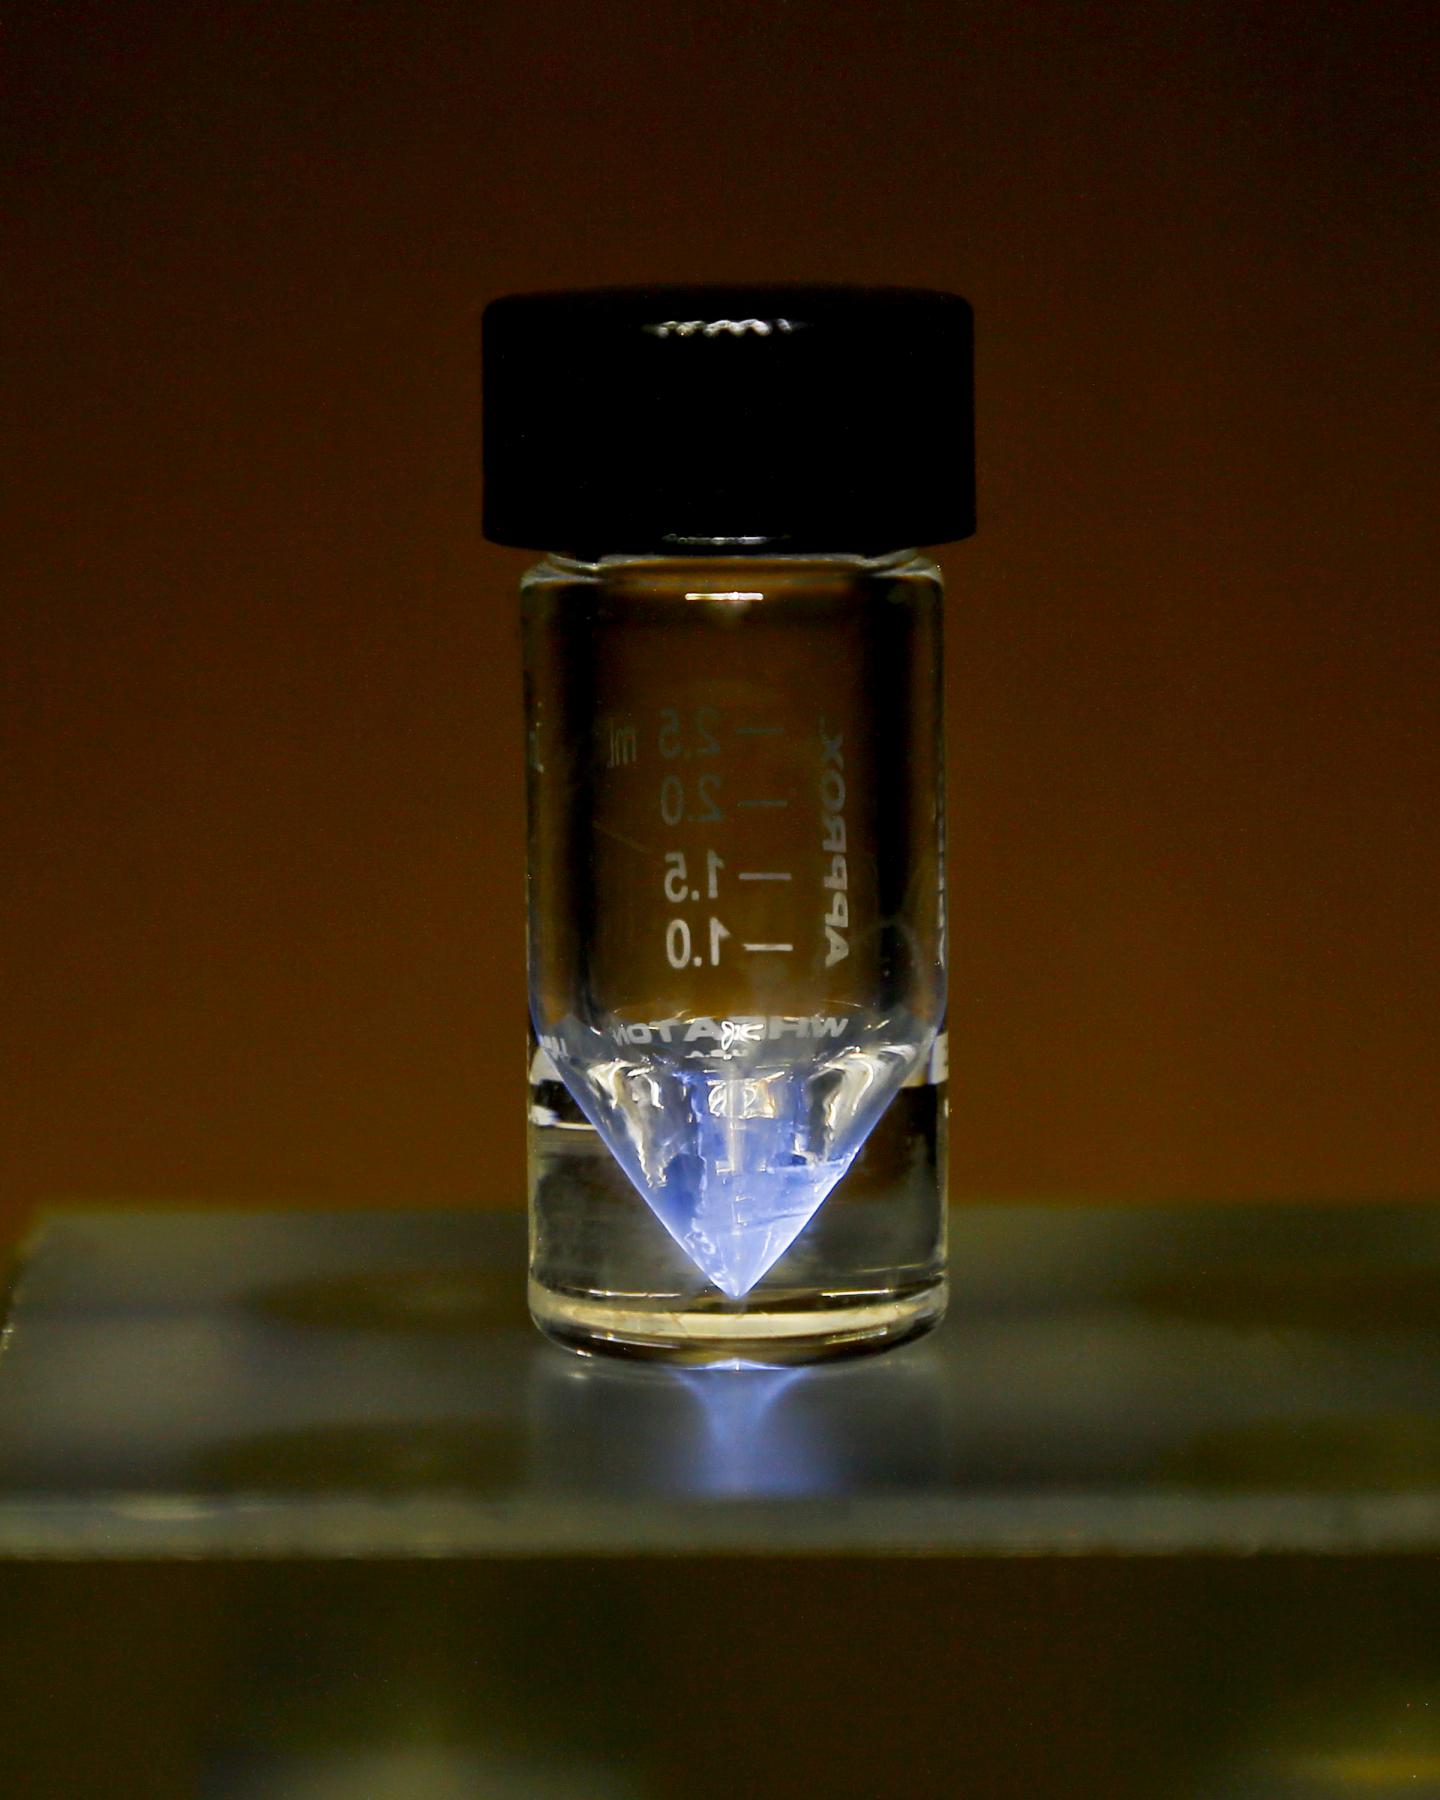 A vial of actinium-225, a potential "Goldilocks" of isotopes that's "just right" for fighting some tough cancers. (Credit: Photo courtesy of Oak Ridge National Laboratory and U.S. Dept. of Energy)